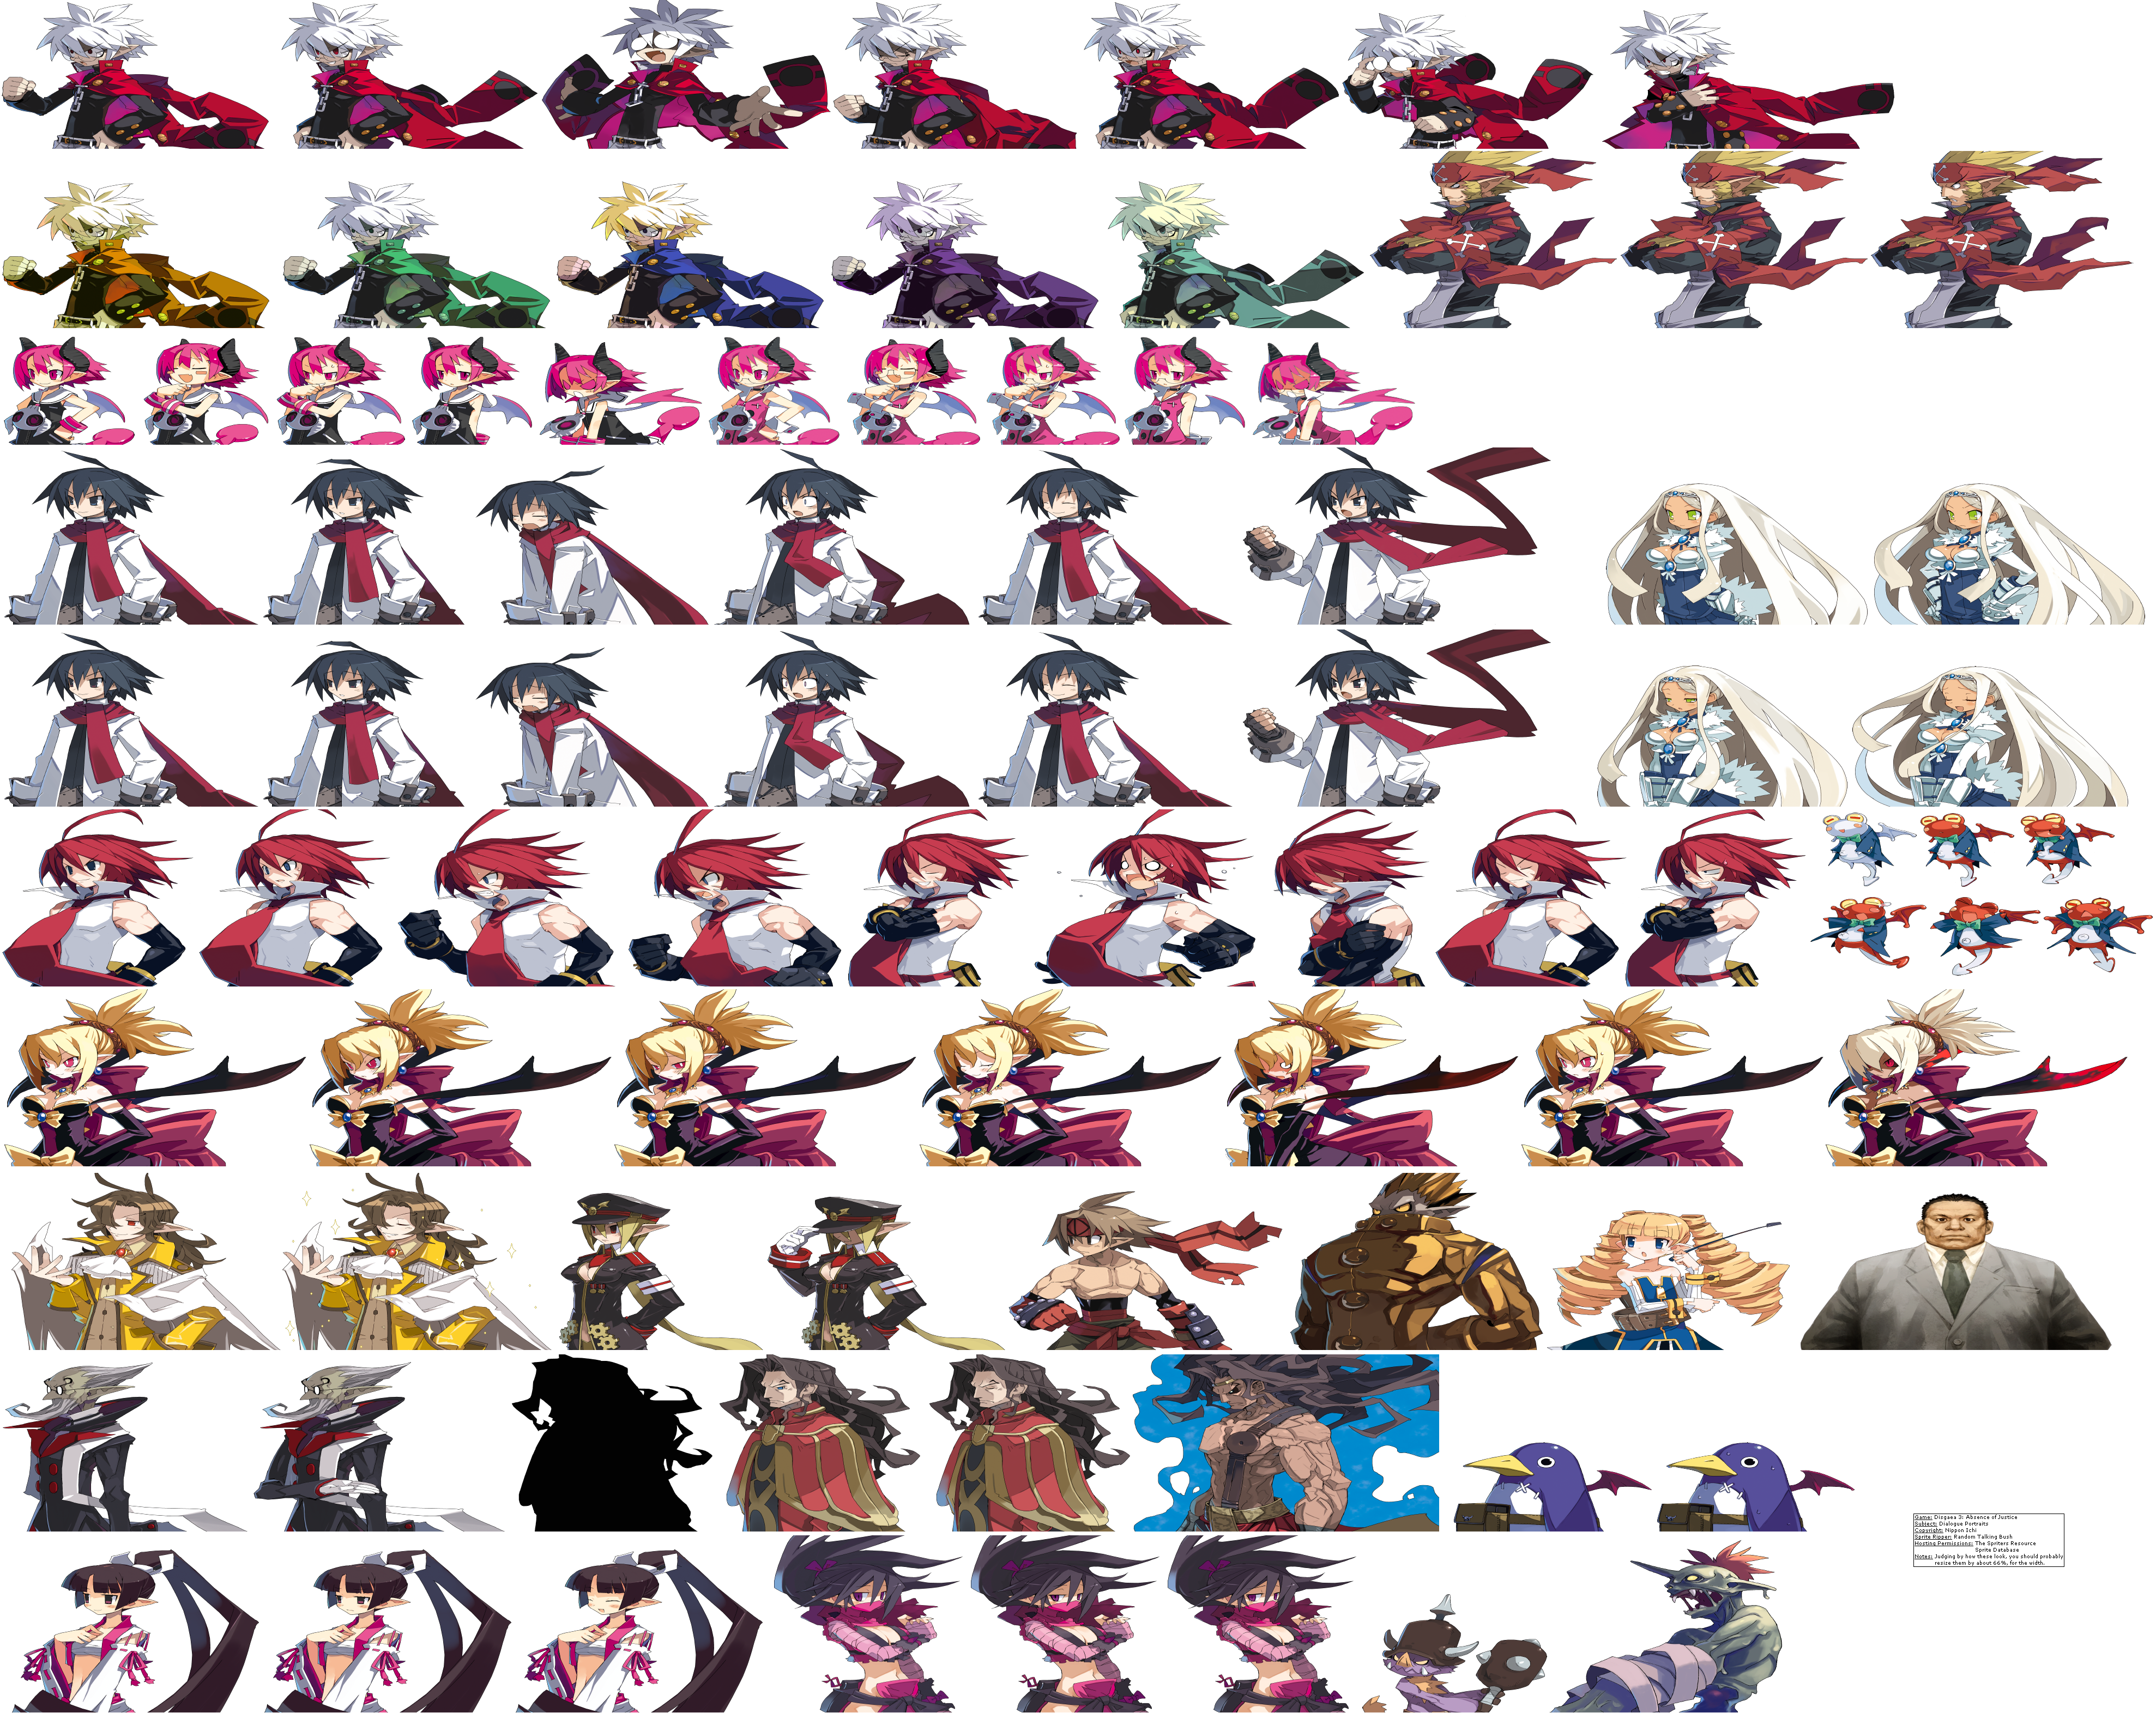 Disgaea 3: Absence of Justice - Dialogue Portraits